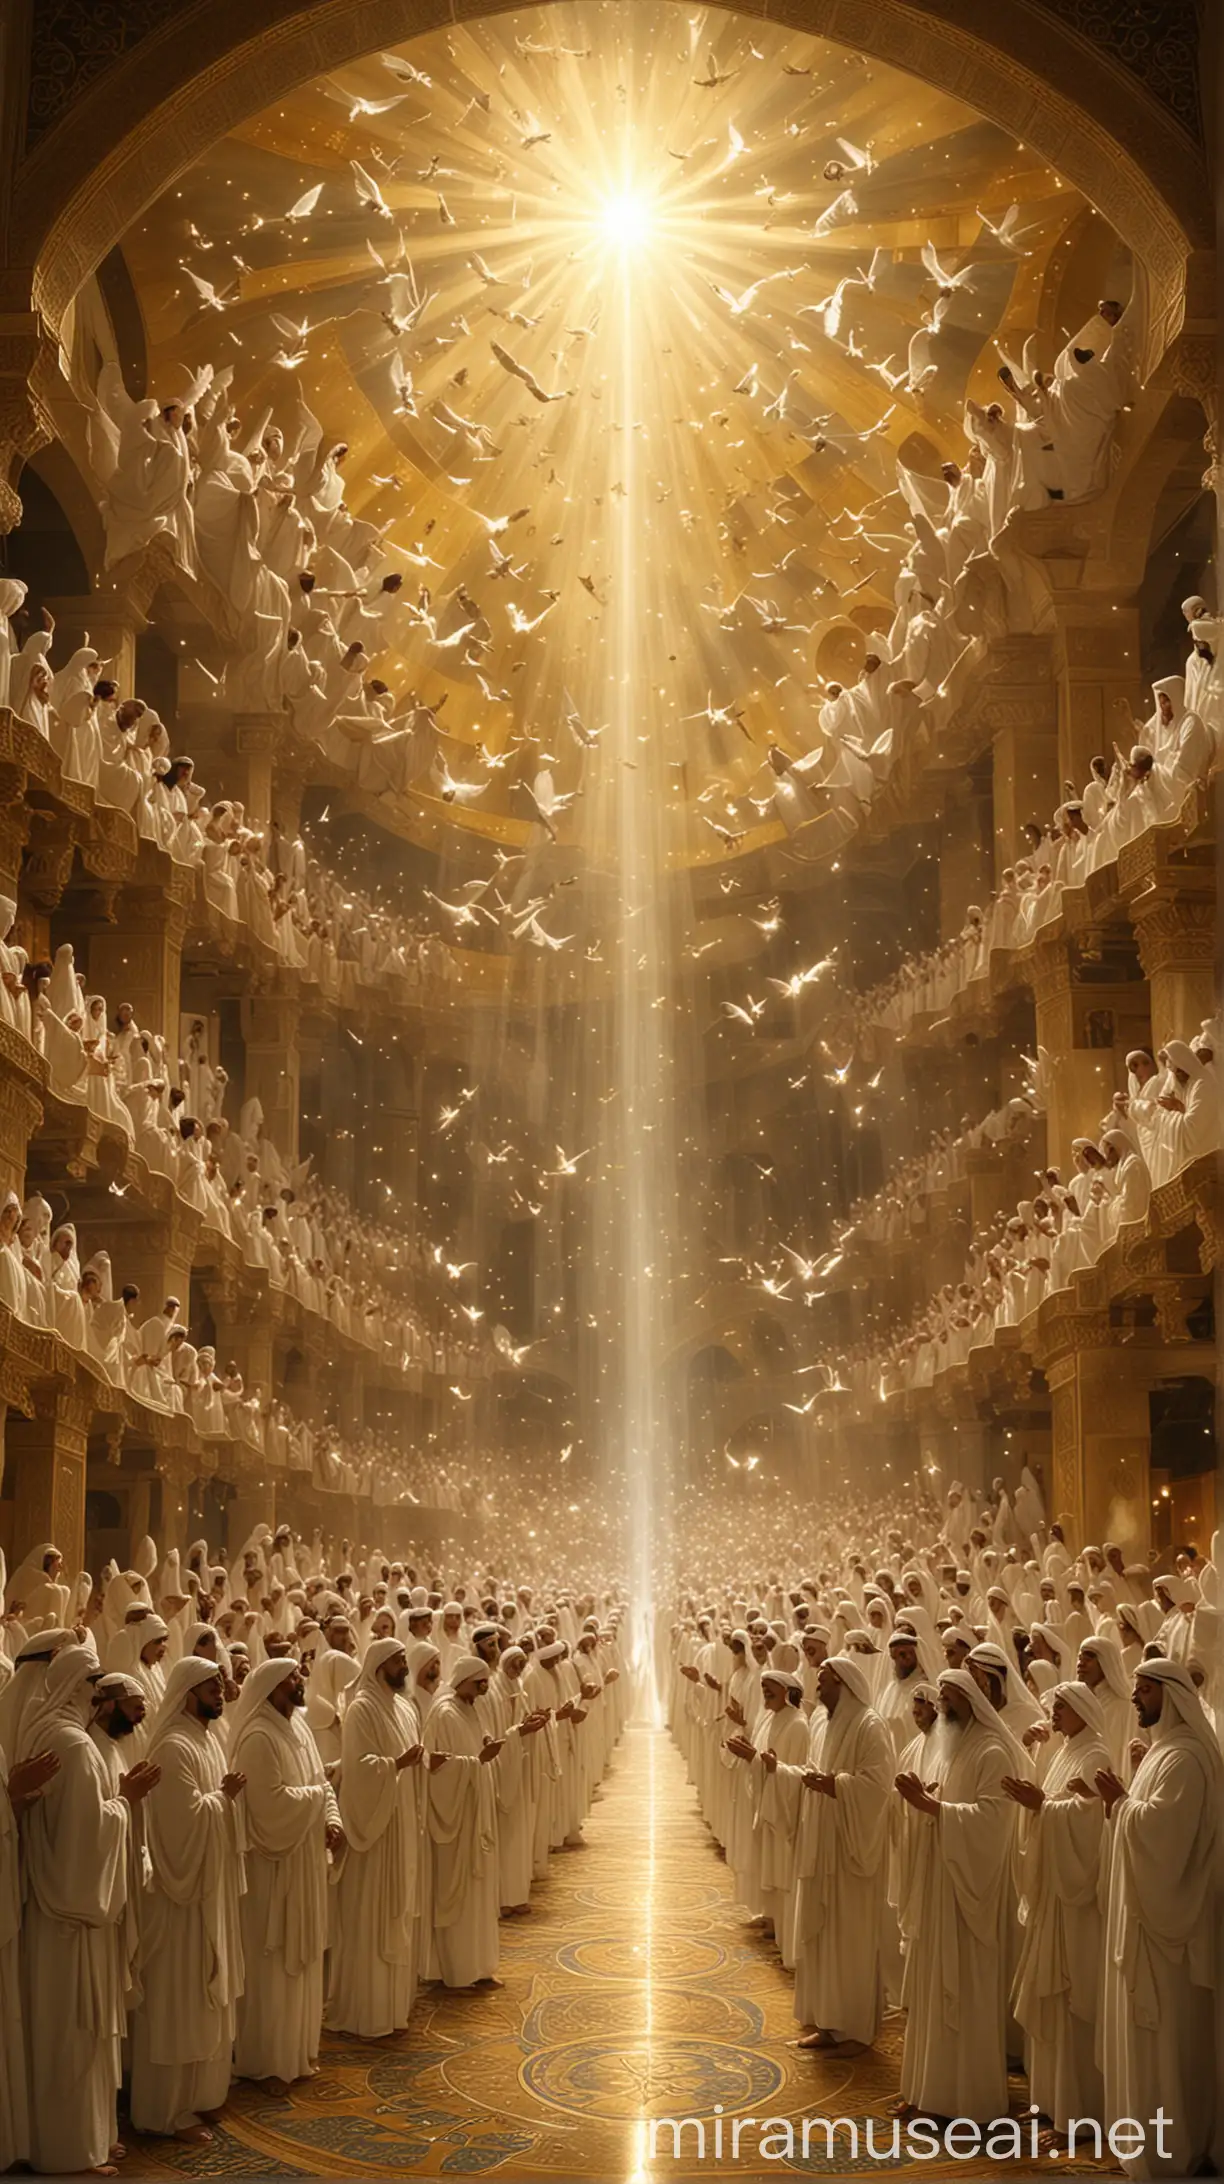 Ethereal Image of AlBayt AlMamur Surrounded by Radiant Angels in Worship